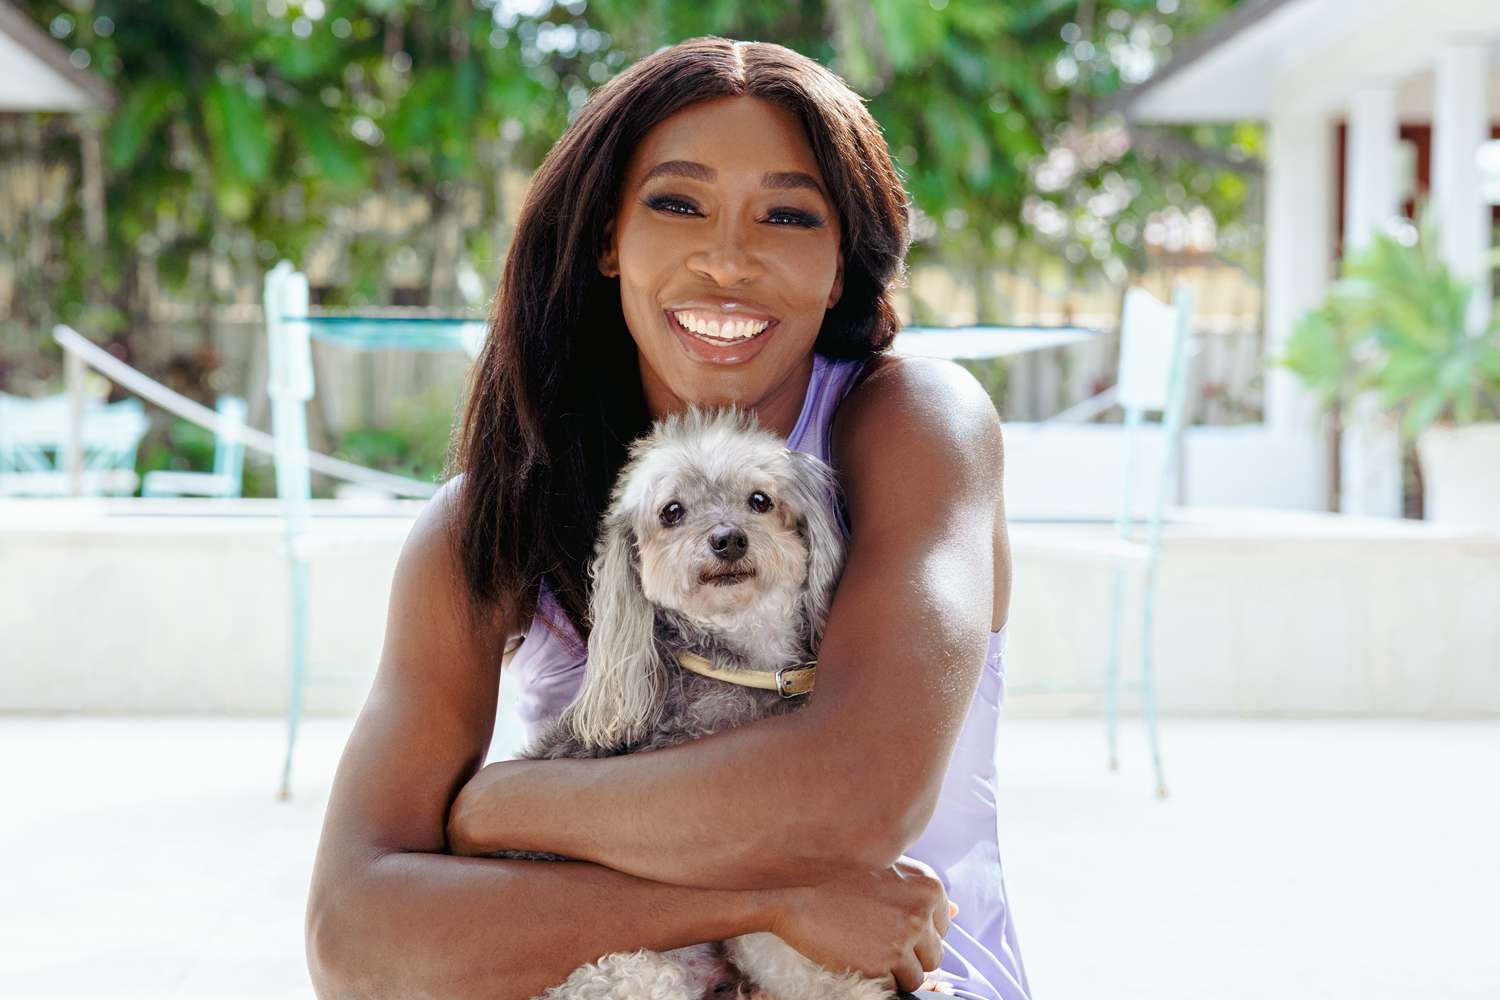 Venus Williams has a Special Bond With Her Dog of 16 Years: 'My Dog Is My Life'